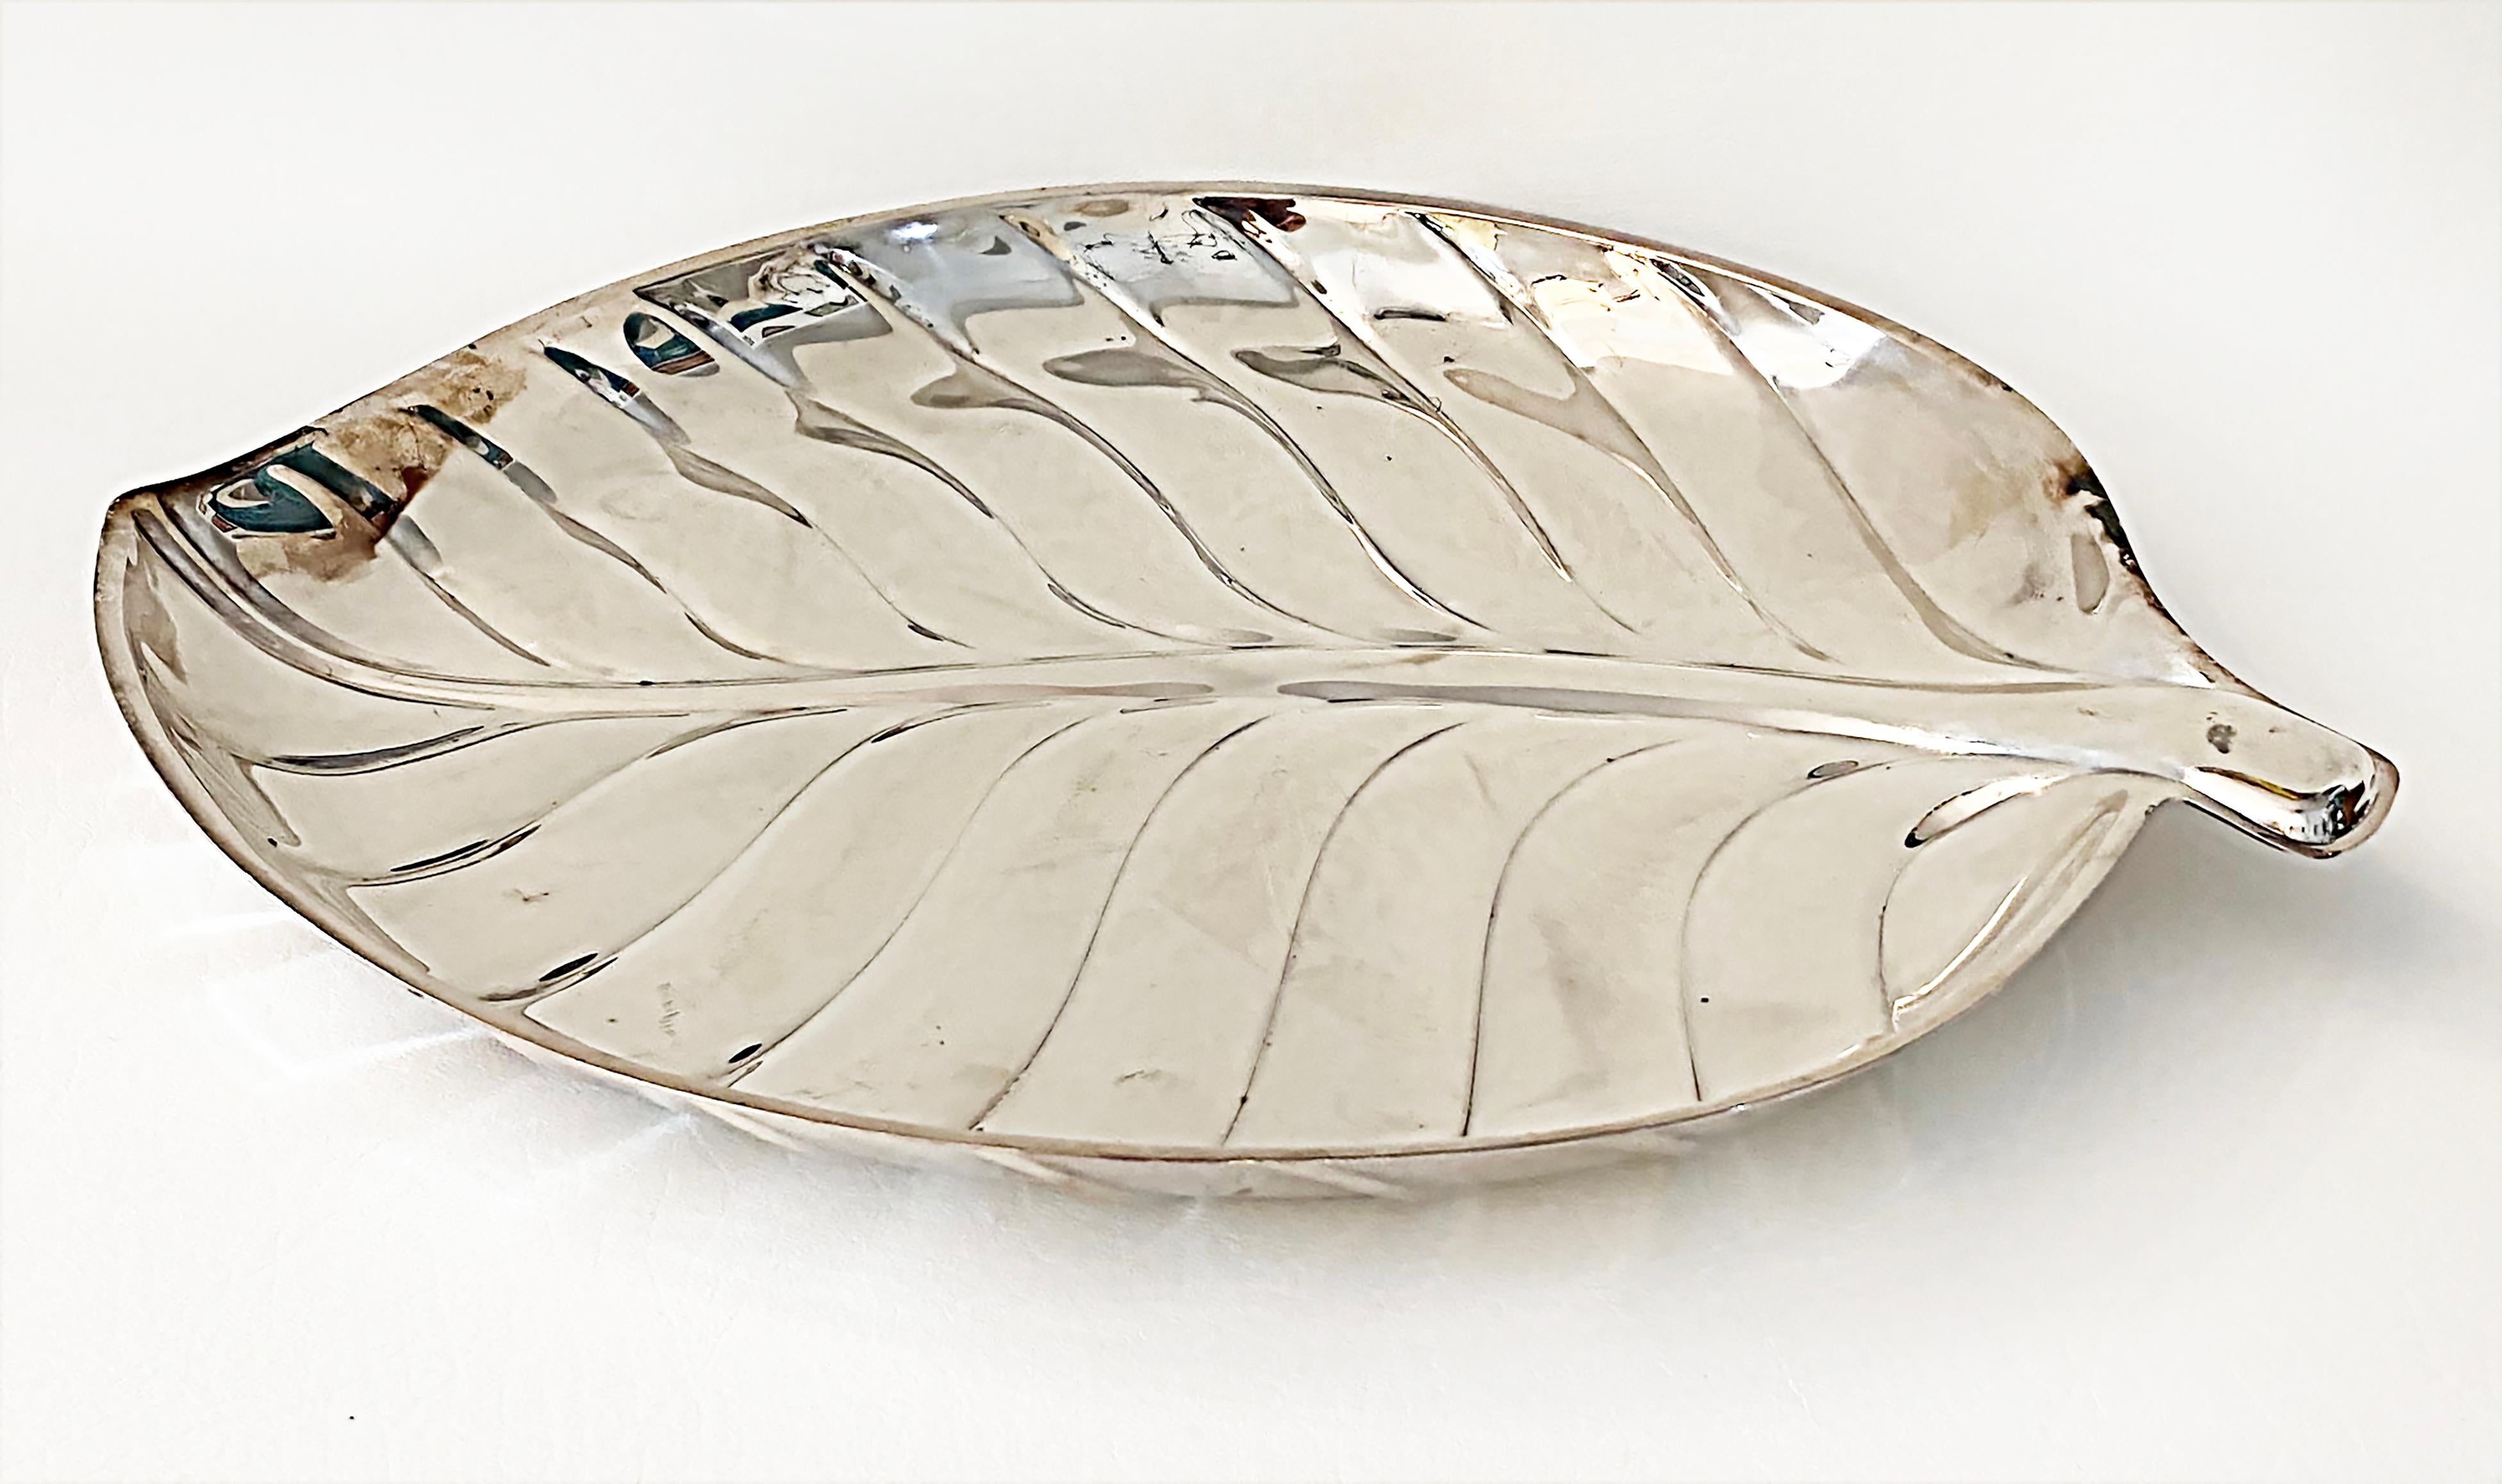 International Silver Leaf Plated Serving Tray, Mid-Late 20th Century, #8199

Offered for sale is a silver plate leaf serving tray by the International Silver Company model #8199 dating to the mid-late 20th century. The tray is in good vintage